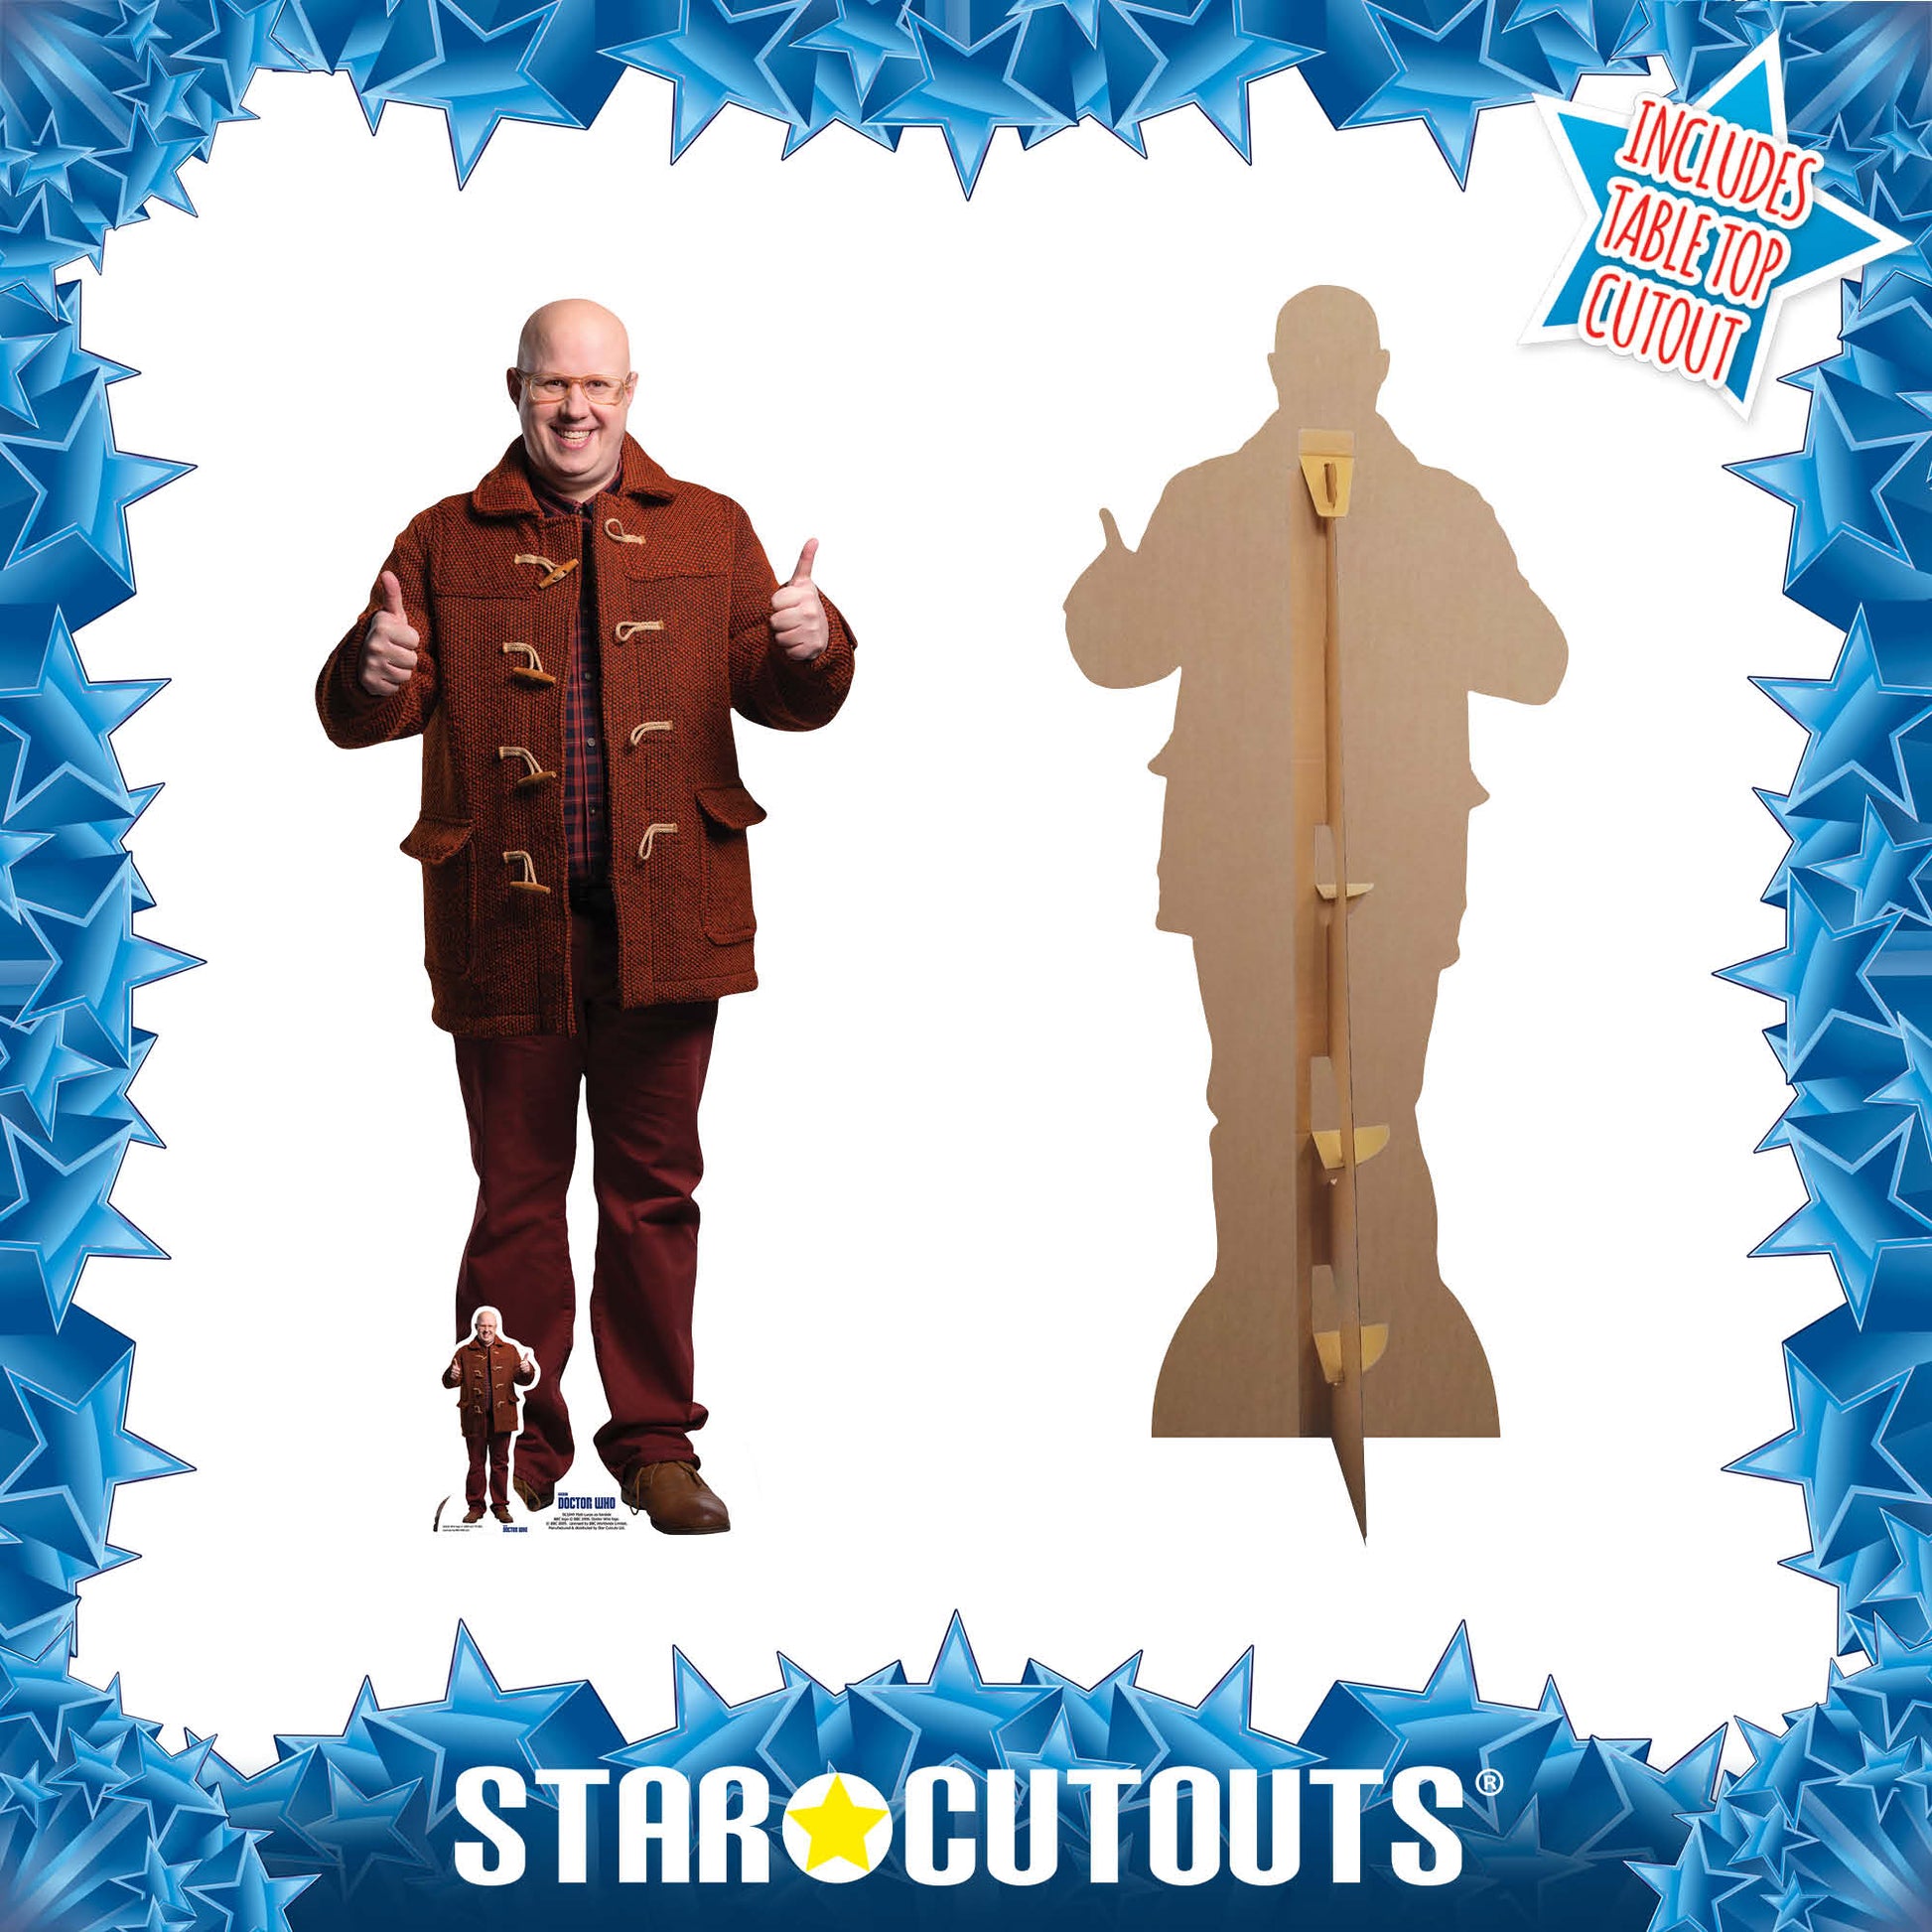 Nardole Doctor Who Cardboard Cut Out Height 170cm - Star Cutouts